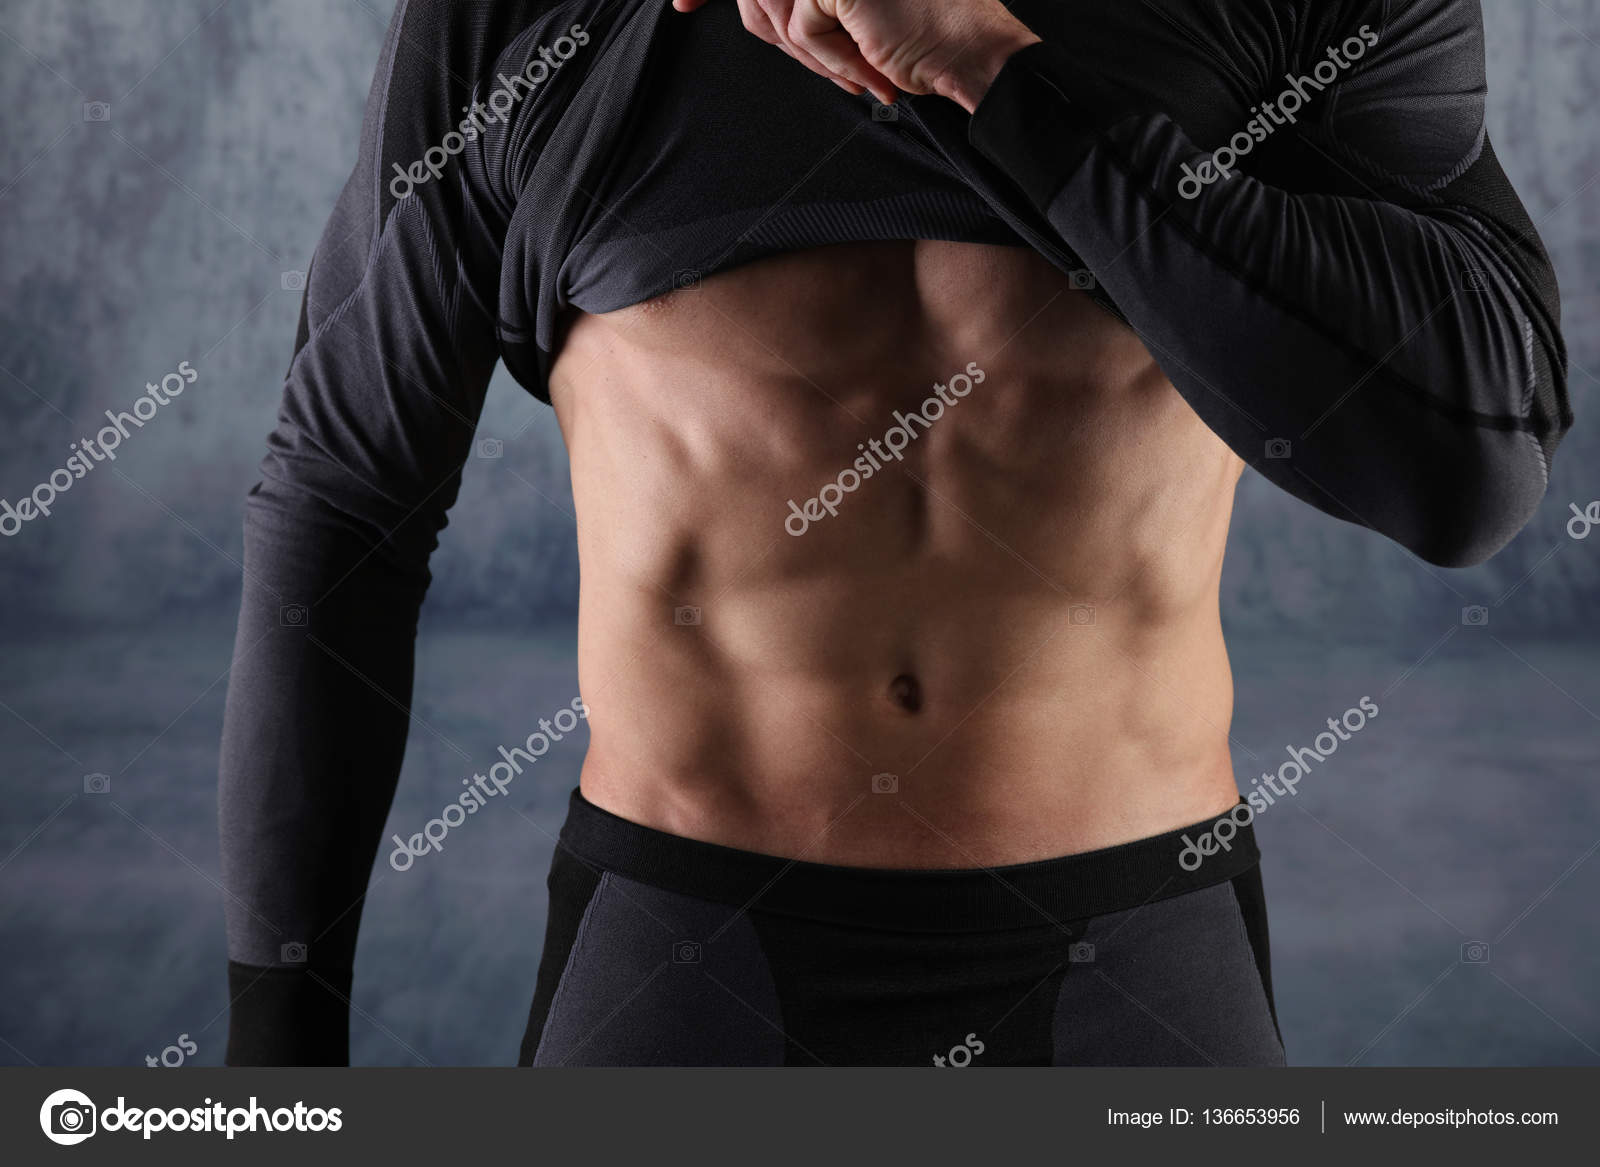 Six pack abs men with chest hair